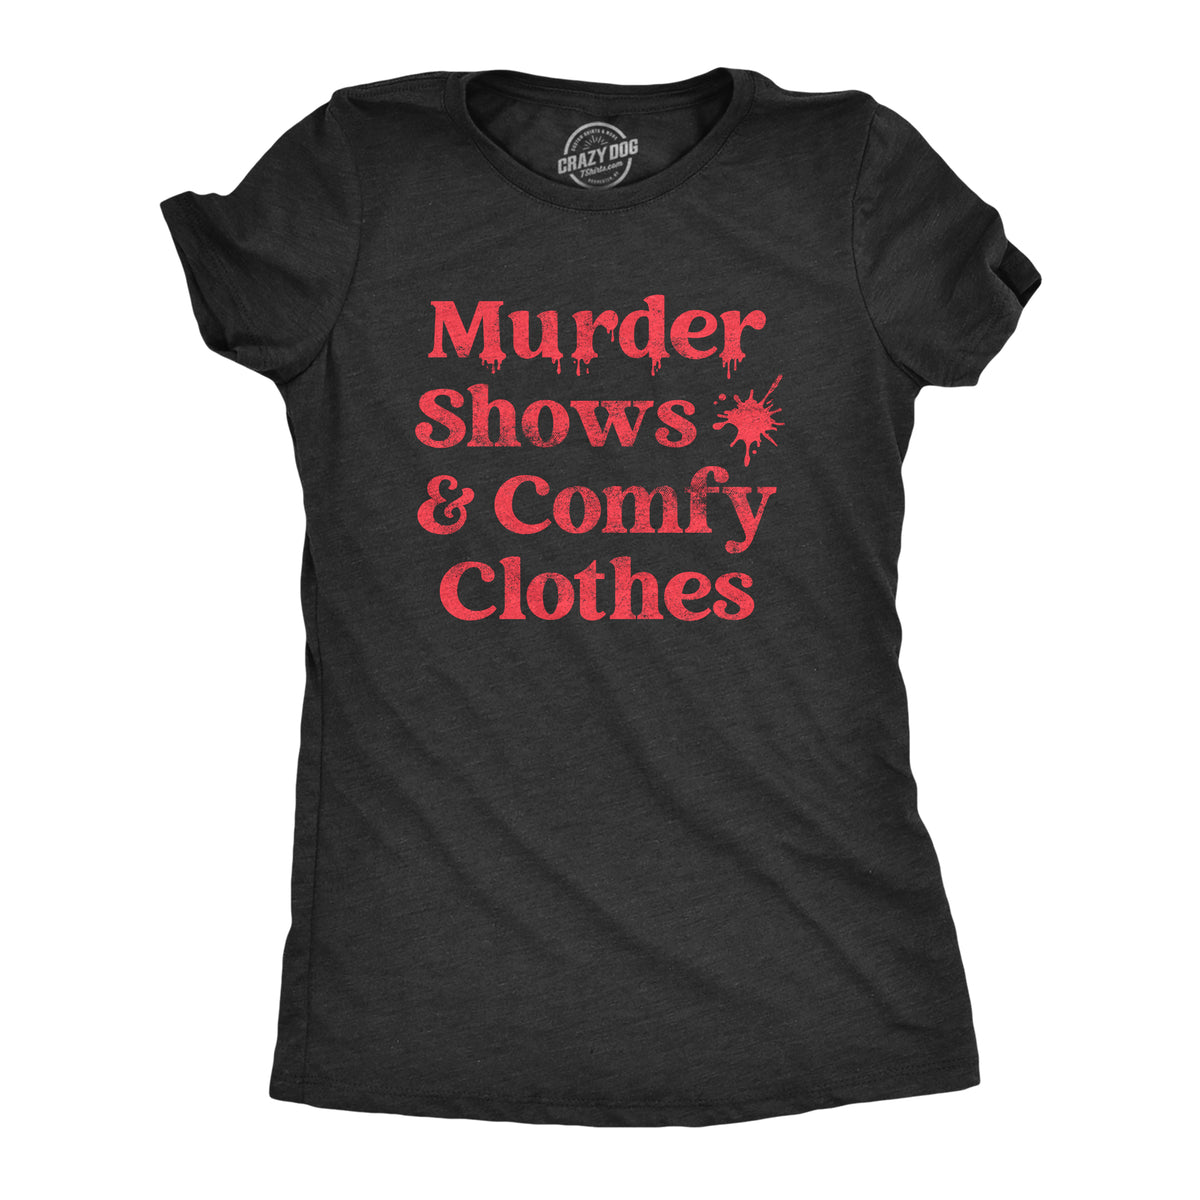 Funny Heather Black Murder Shows And Comfy Clothes Womens T Shirt Nerdy TV &amp; Movies Tee